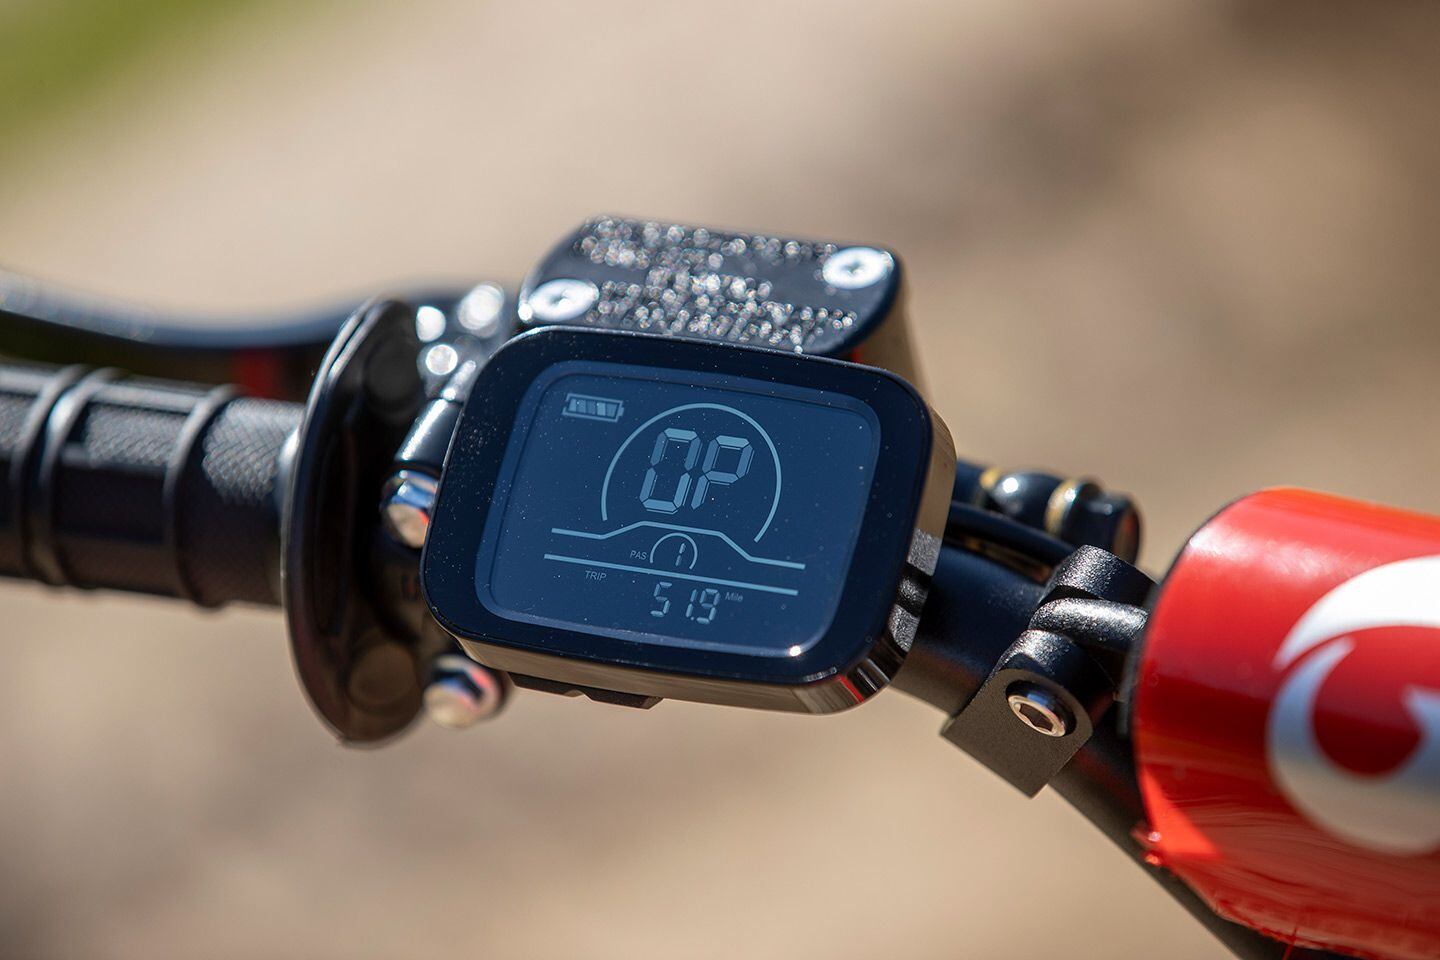 A removable 950-watt battery powers the CRF-E2. It offers nearly two hours of run time and can be charged at home with a standard 120-volt power outlet in the US.